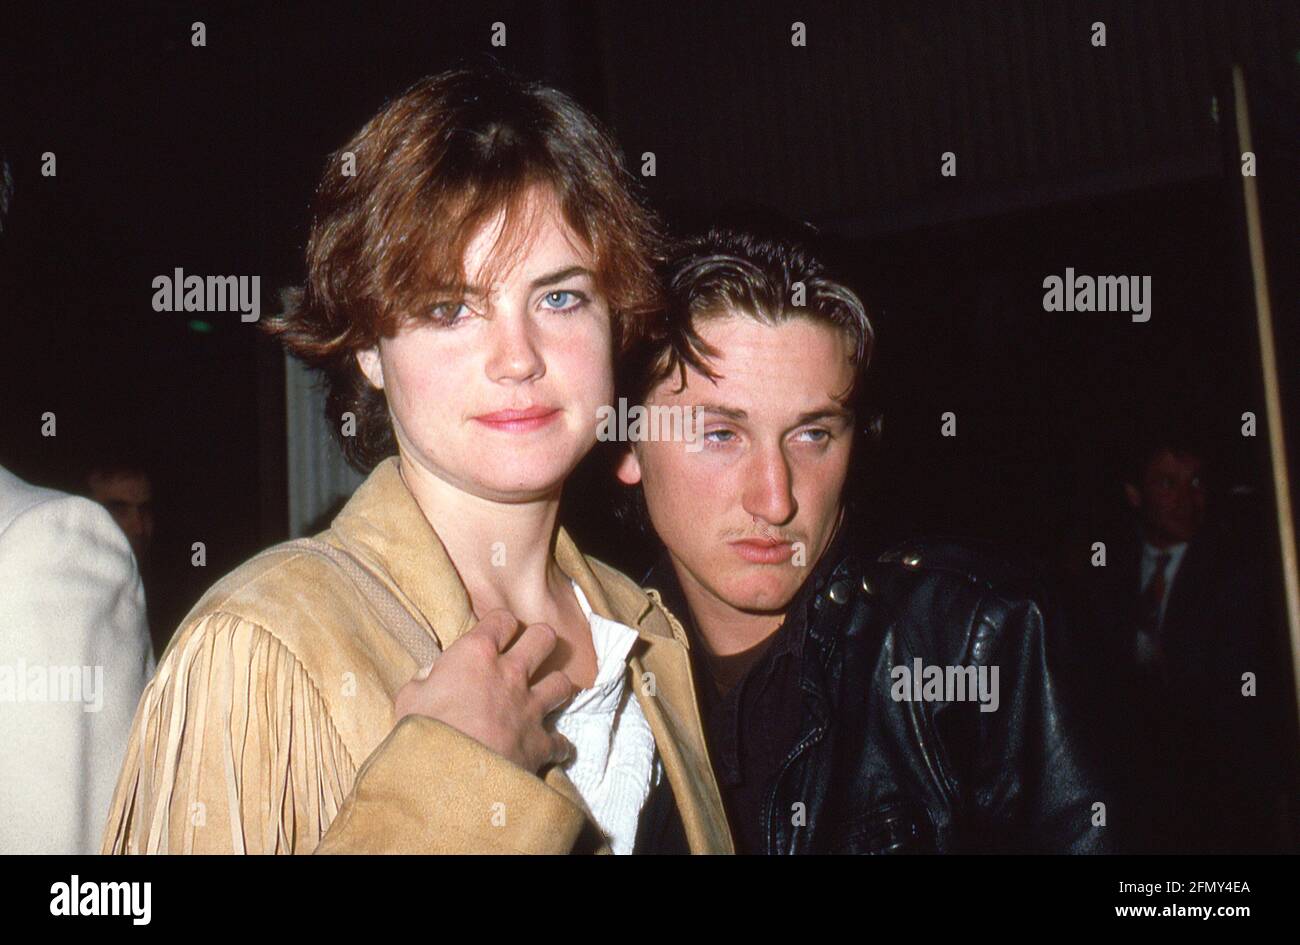 BEVERLY HILLS, CA - MARCH 30: Actress Elizabeth McGovern and actor Sean Penn attend the 'Moscow on the Hudson' Beverly Hills Premiere on March 30, 1984 at the Samuel Goldwyn Theatre in Beverly Hills, California Credit: Ralph Dominguez/MediaPunch Credit: Ralph Dominguez/MediaPunch Stock Photo